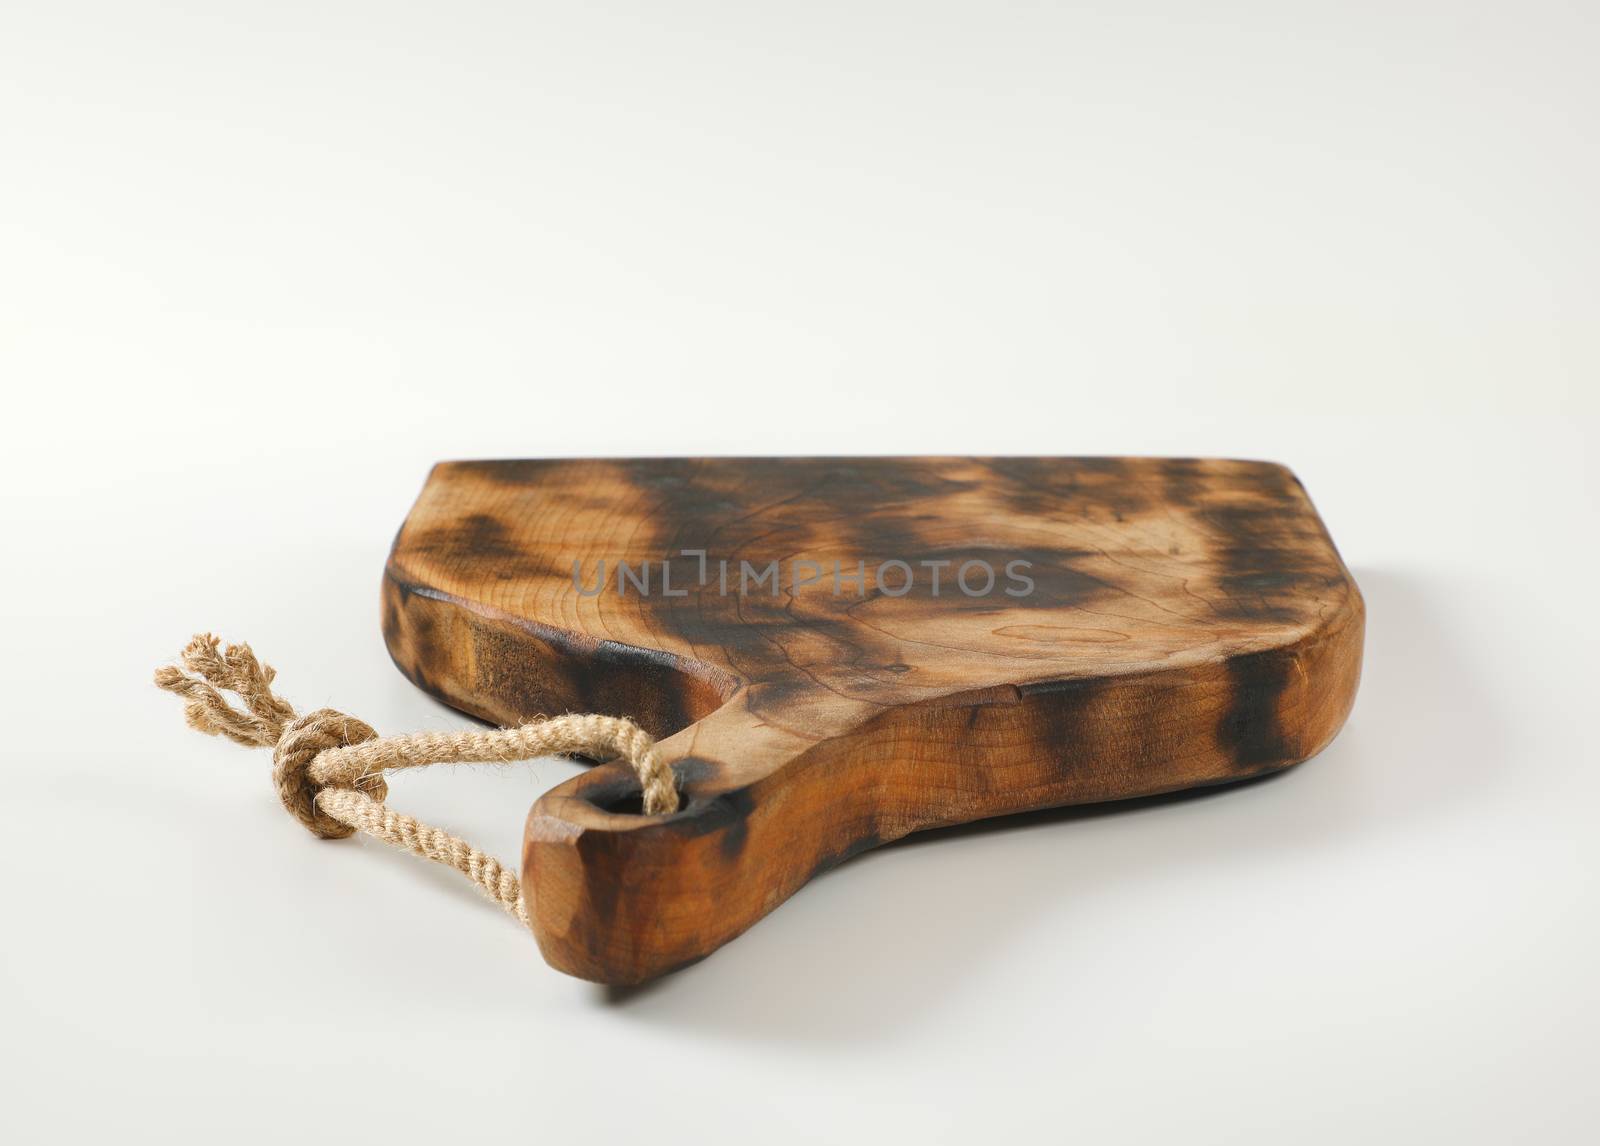 Rustic paddle shaped cutting board by Digifoodstock